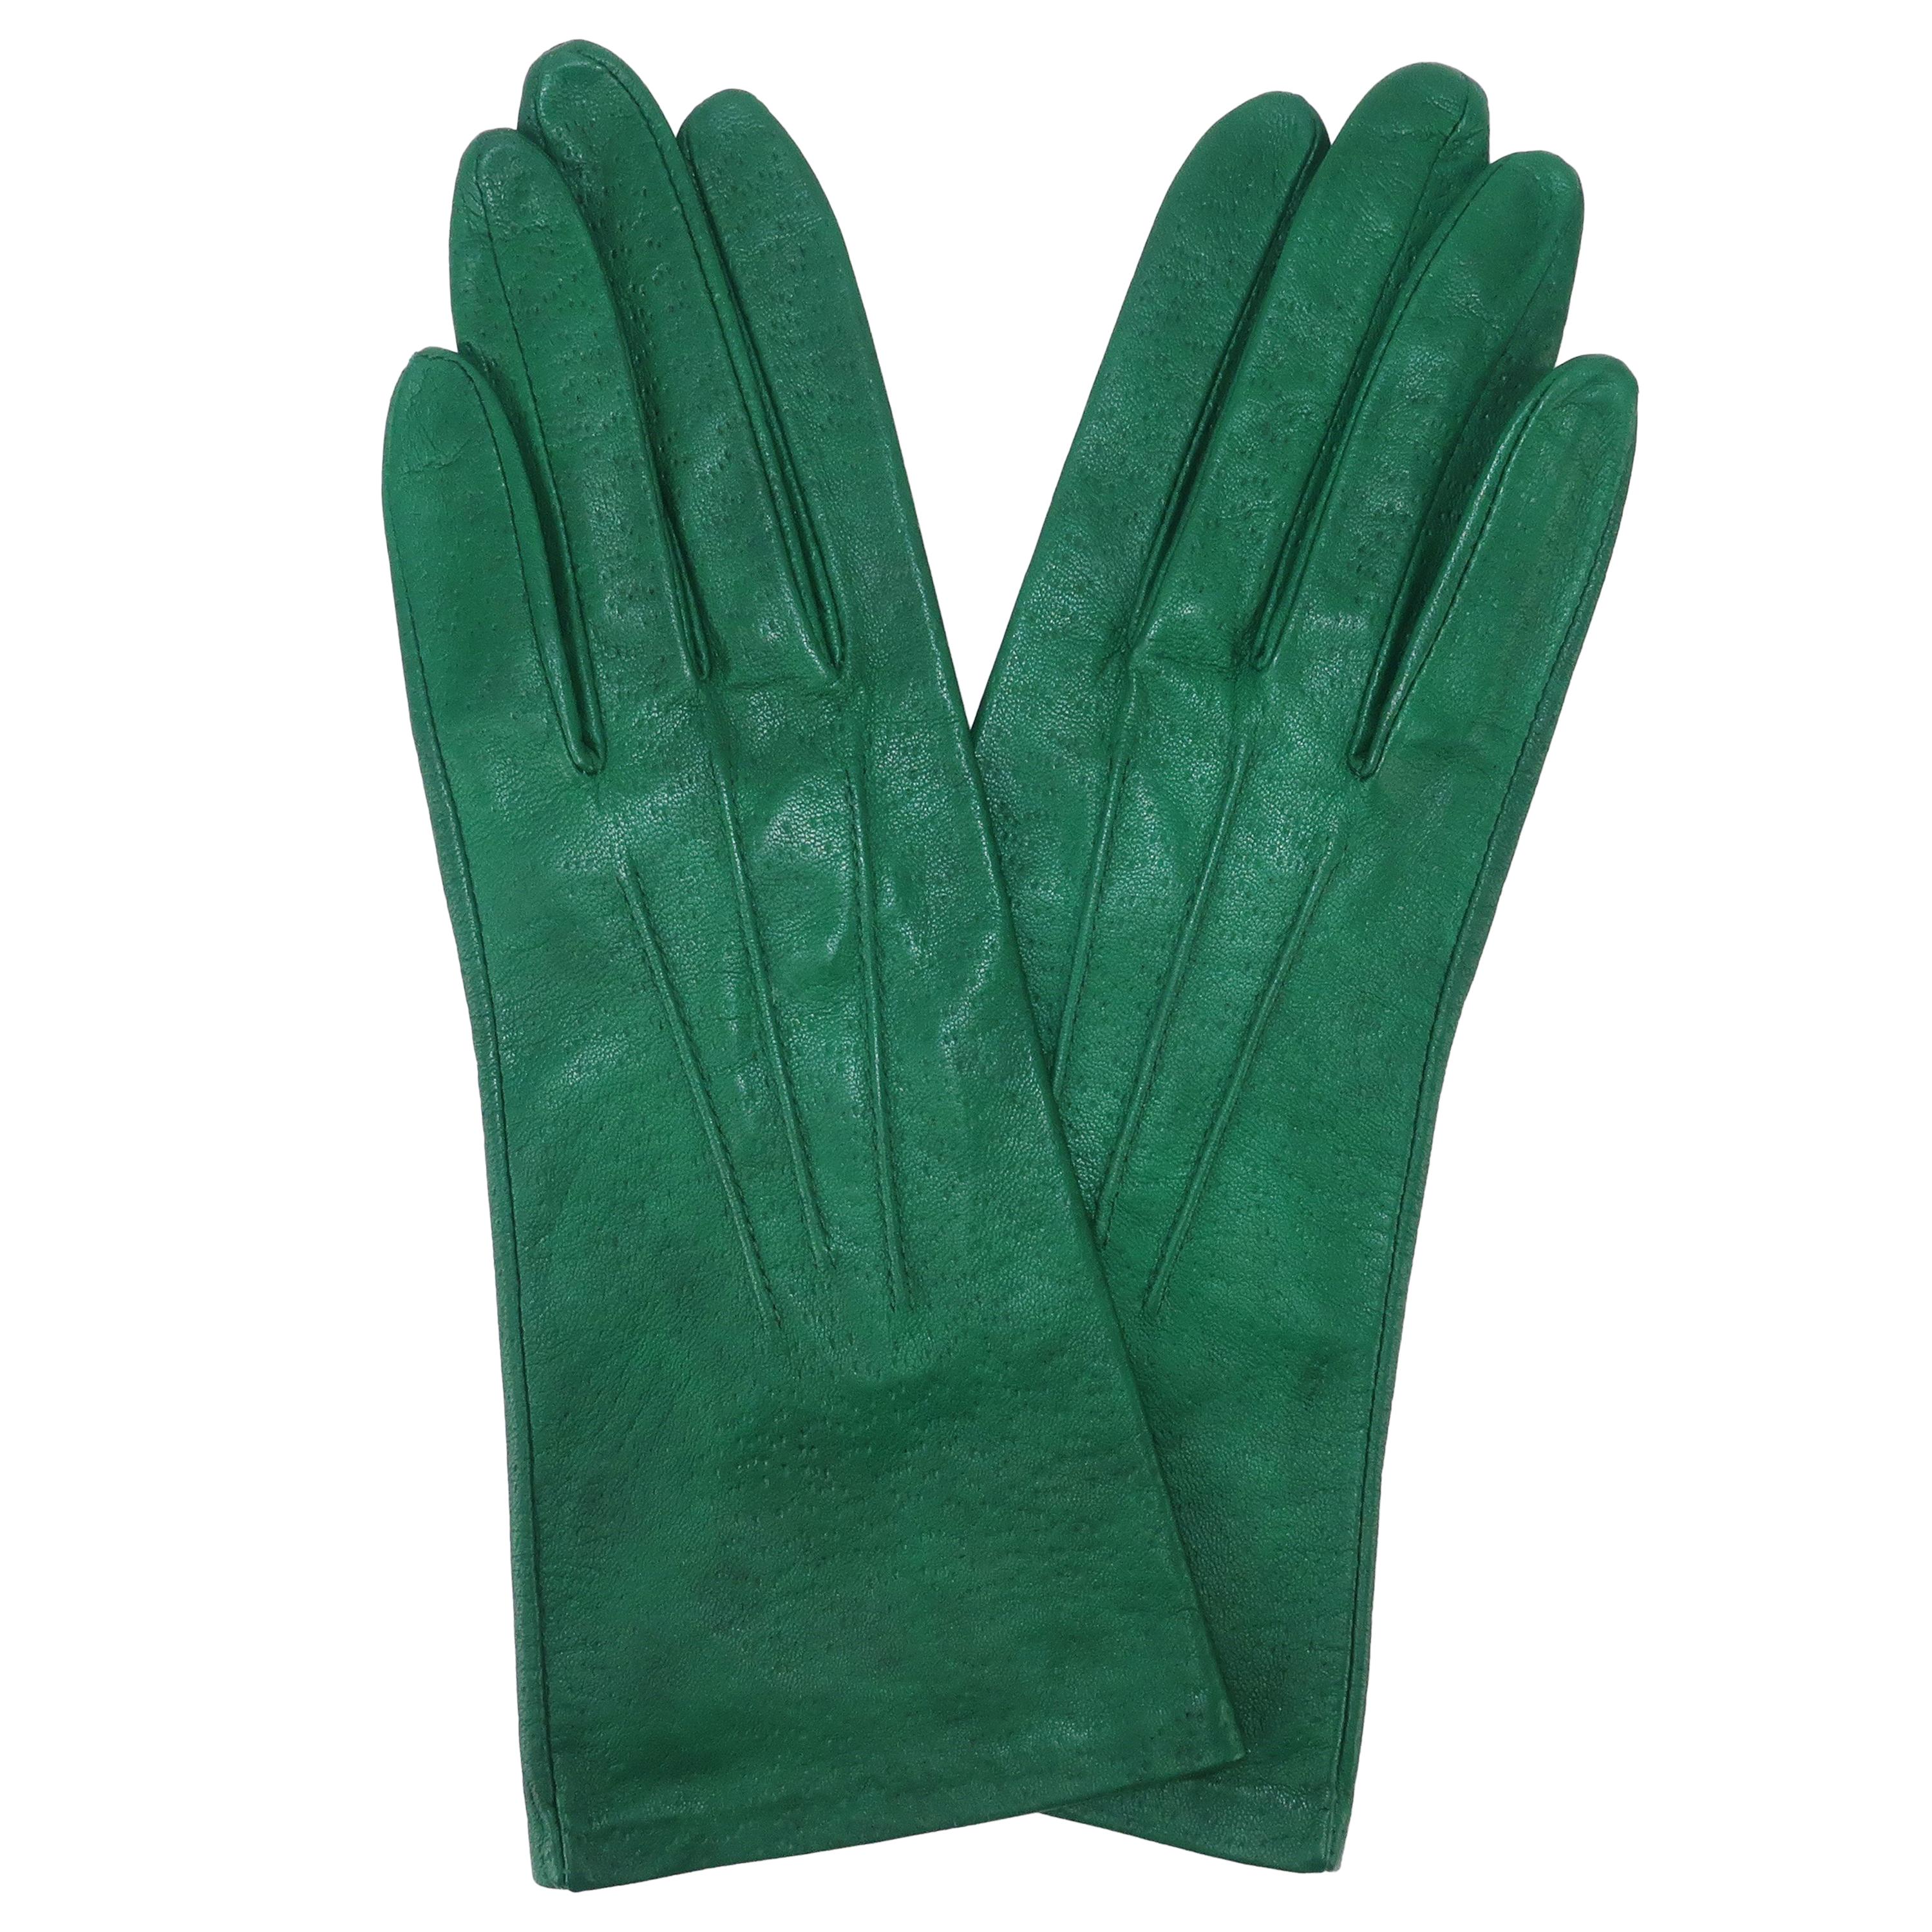 C.1960 Emerald Green Textured Leather Gloves